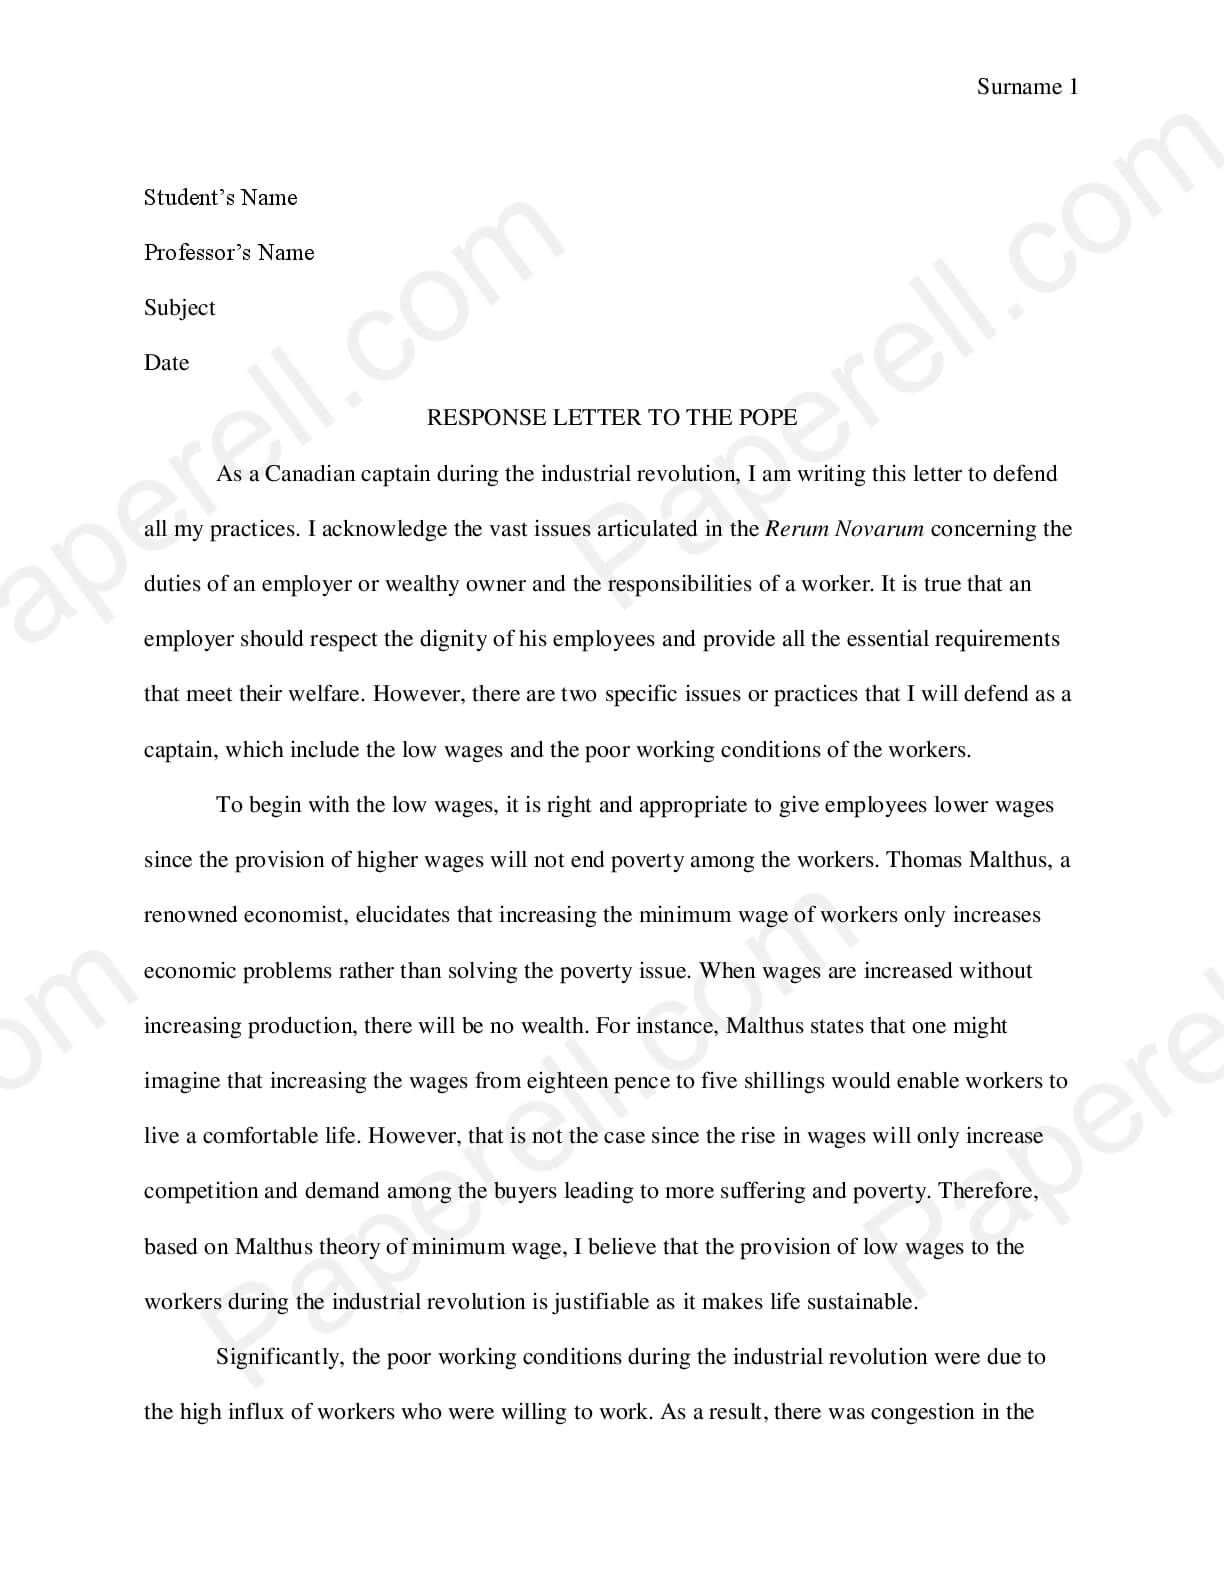 Review of literature papers for purchase